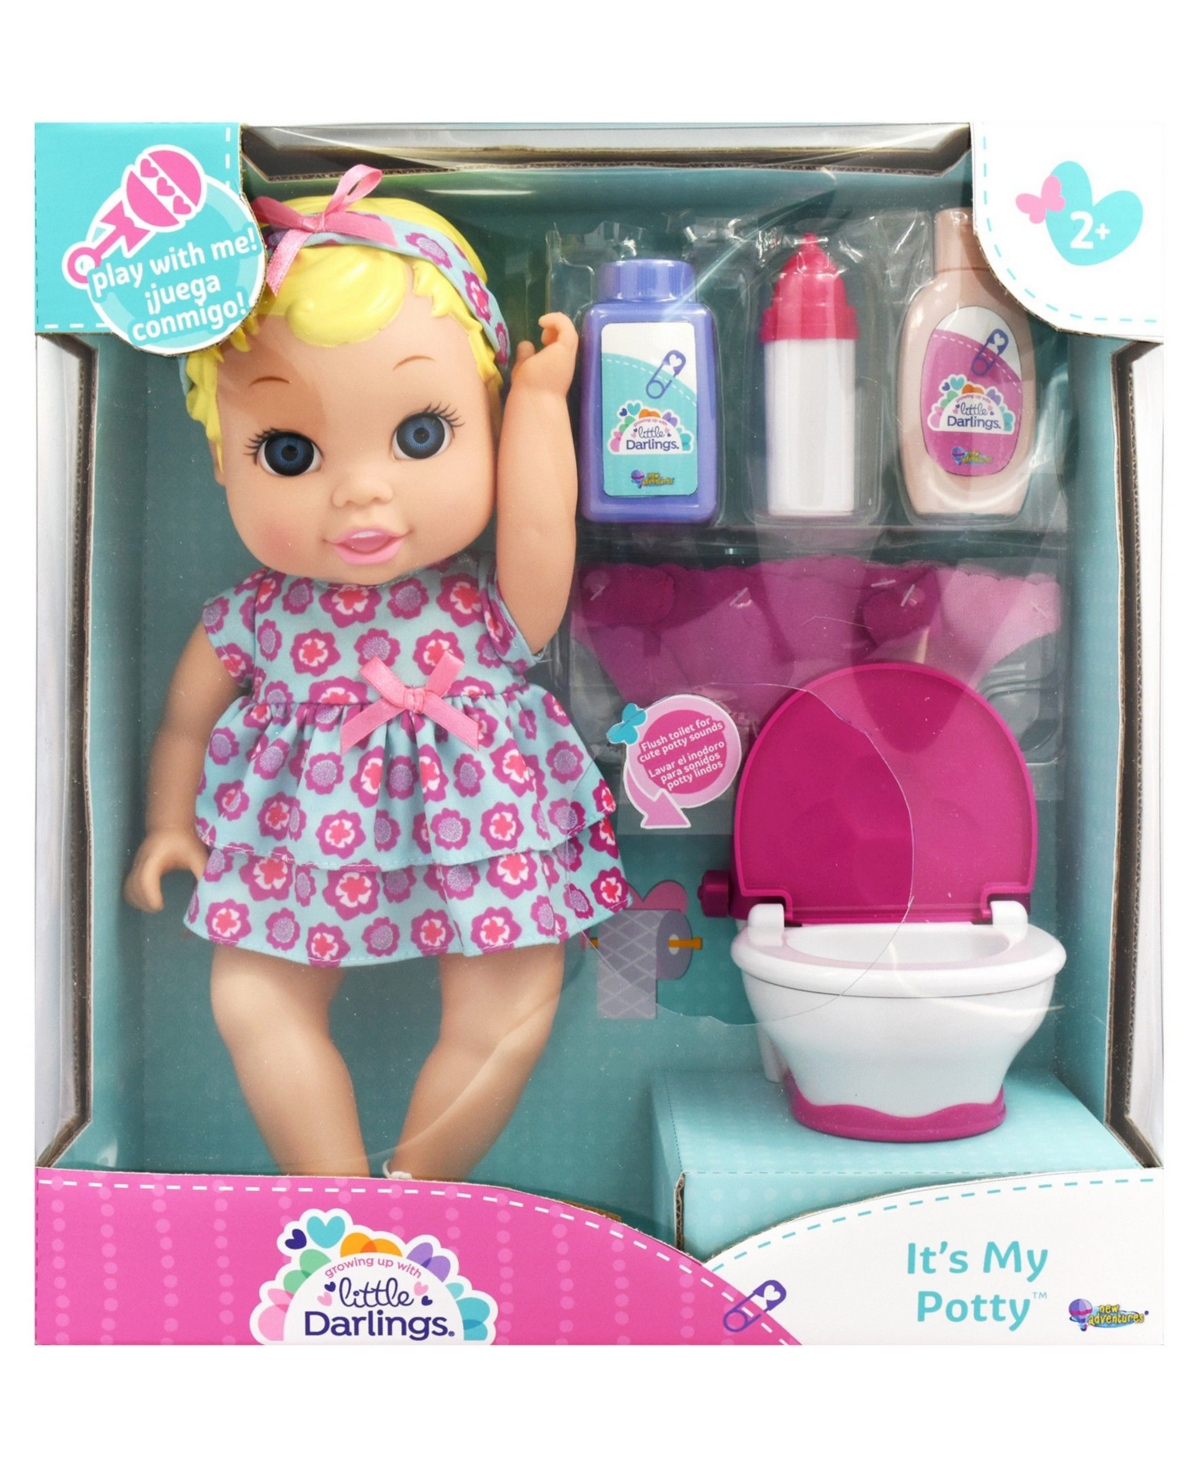 Redbox New Adventures Little Darlings It's My Potty Toy Baby Doll Play Set In Multi